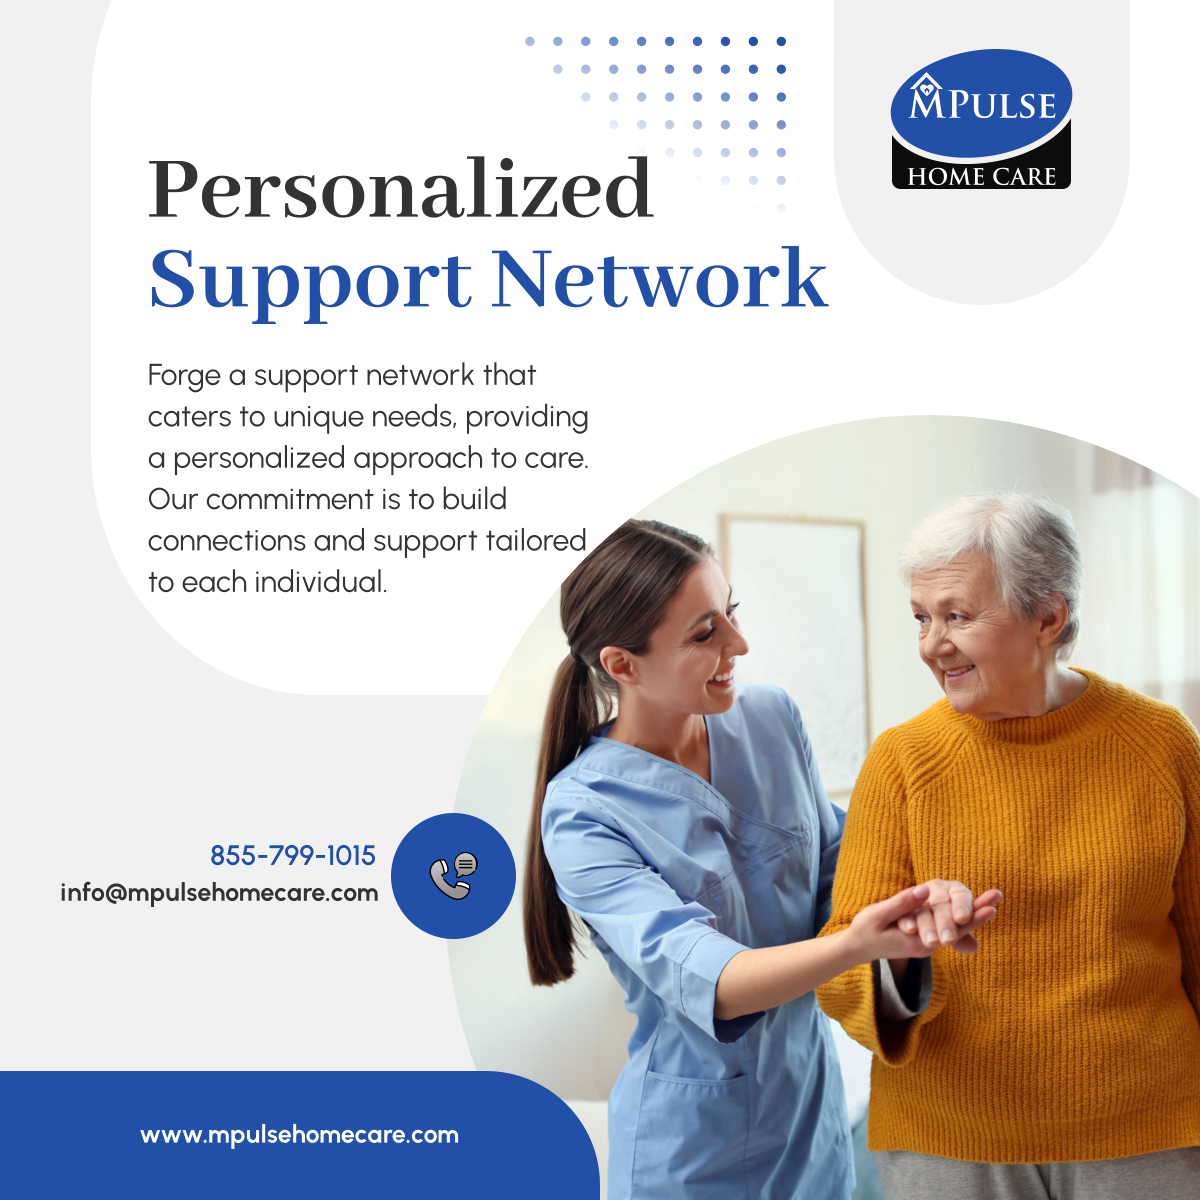 Our commitment to your well-being goes beyond standardized care. Discover the power of a personalized support network designed to meet your unique needs.

#PersonalizedSupport #CharlotteNC #HomeCare